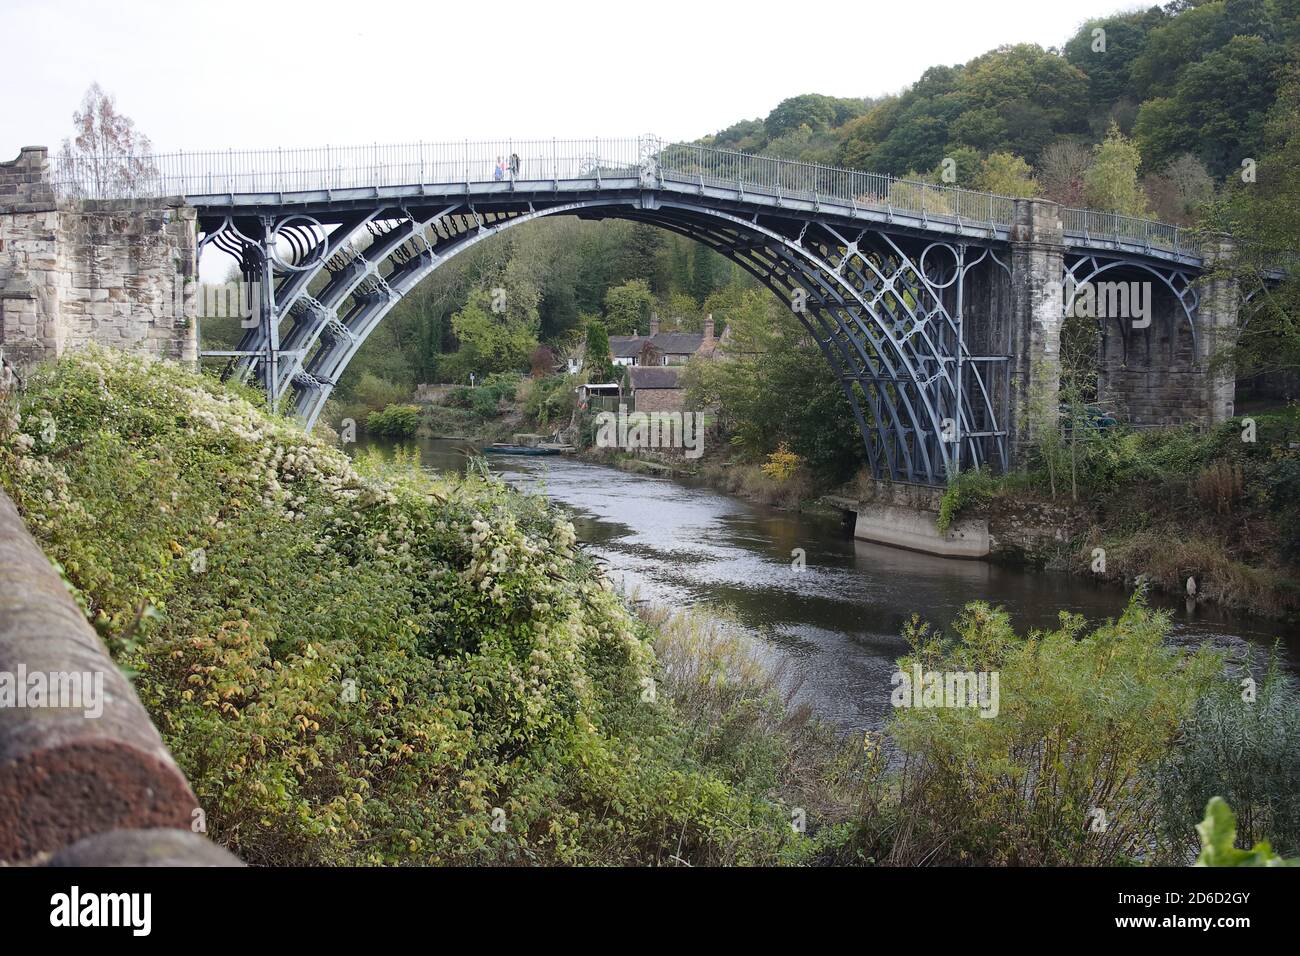 The Iron Bridge Built By Abraham Darby Iii The First Bridge In The World To Be Made From Cast Iron Stock Photo Alamy